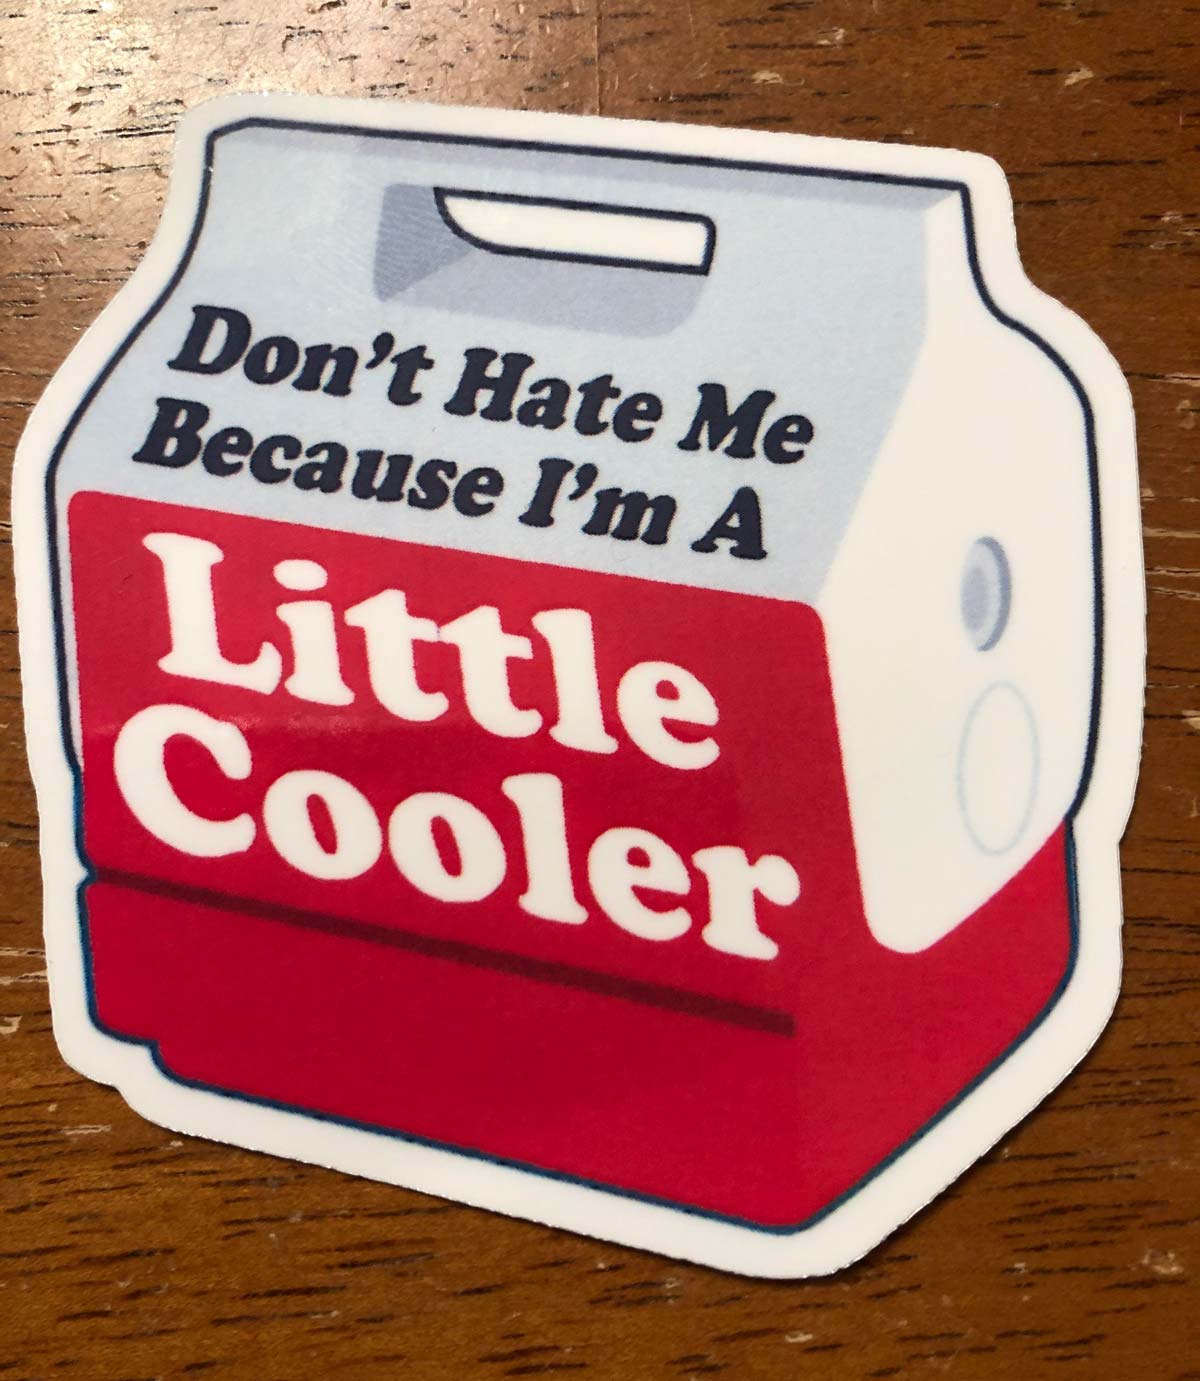 This sticker I received as a birthday gift!